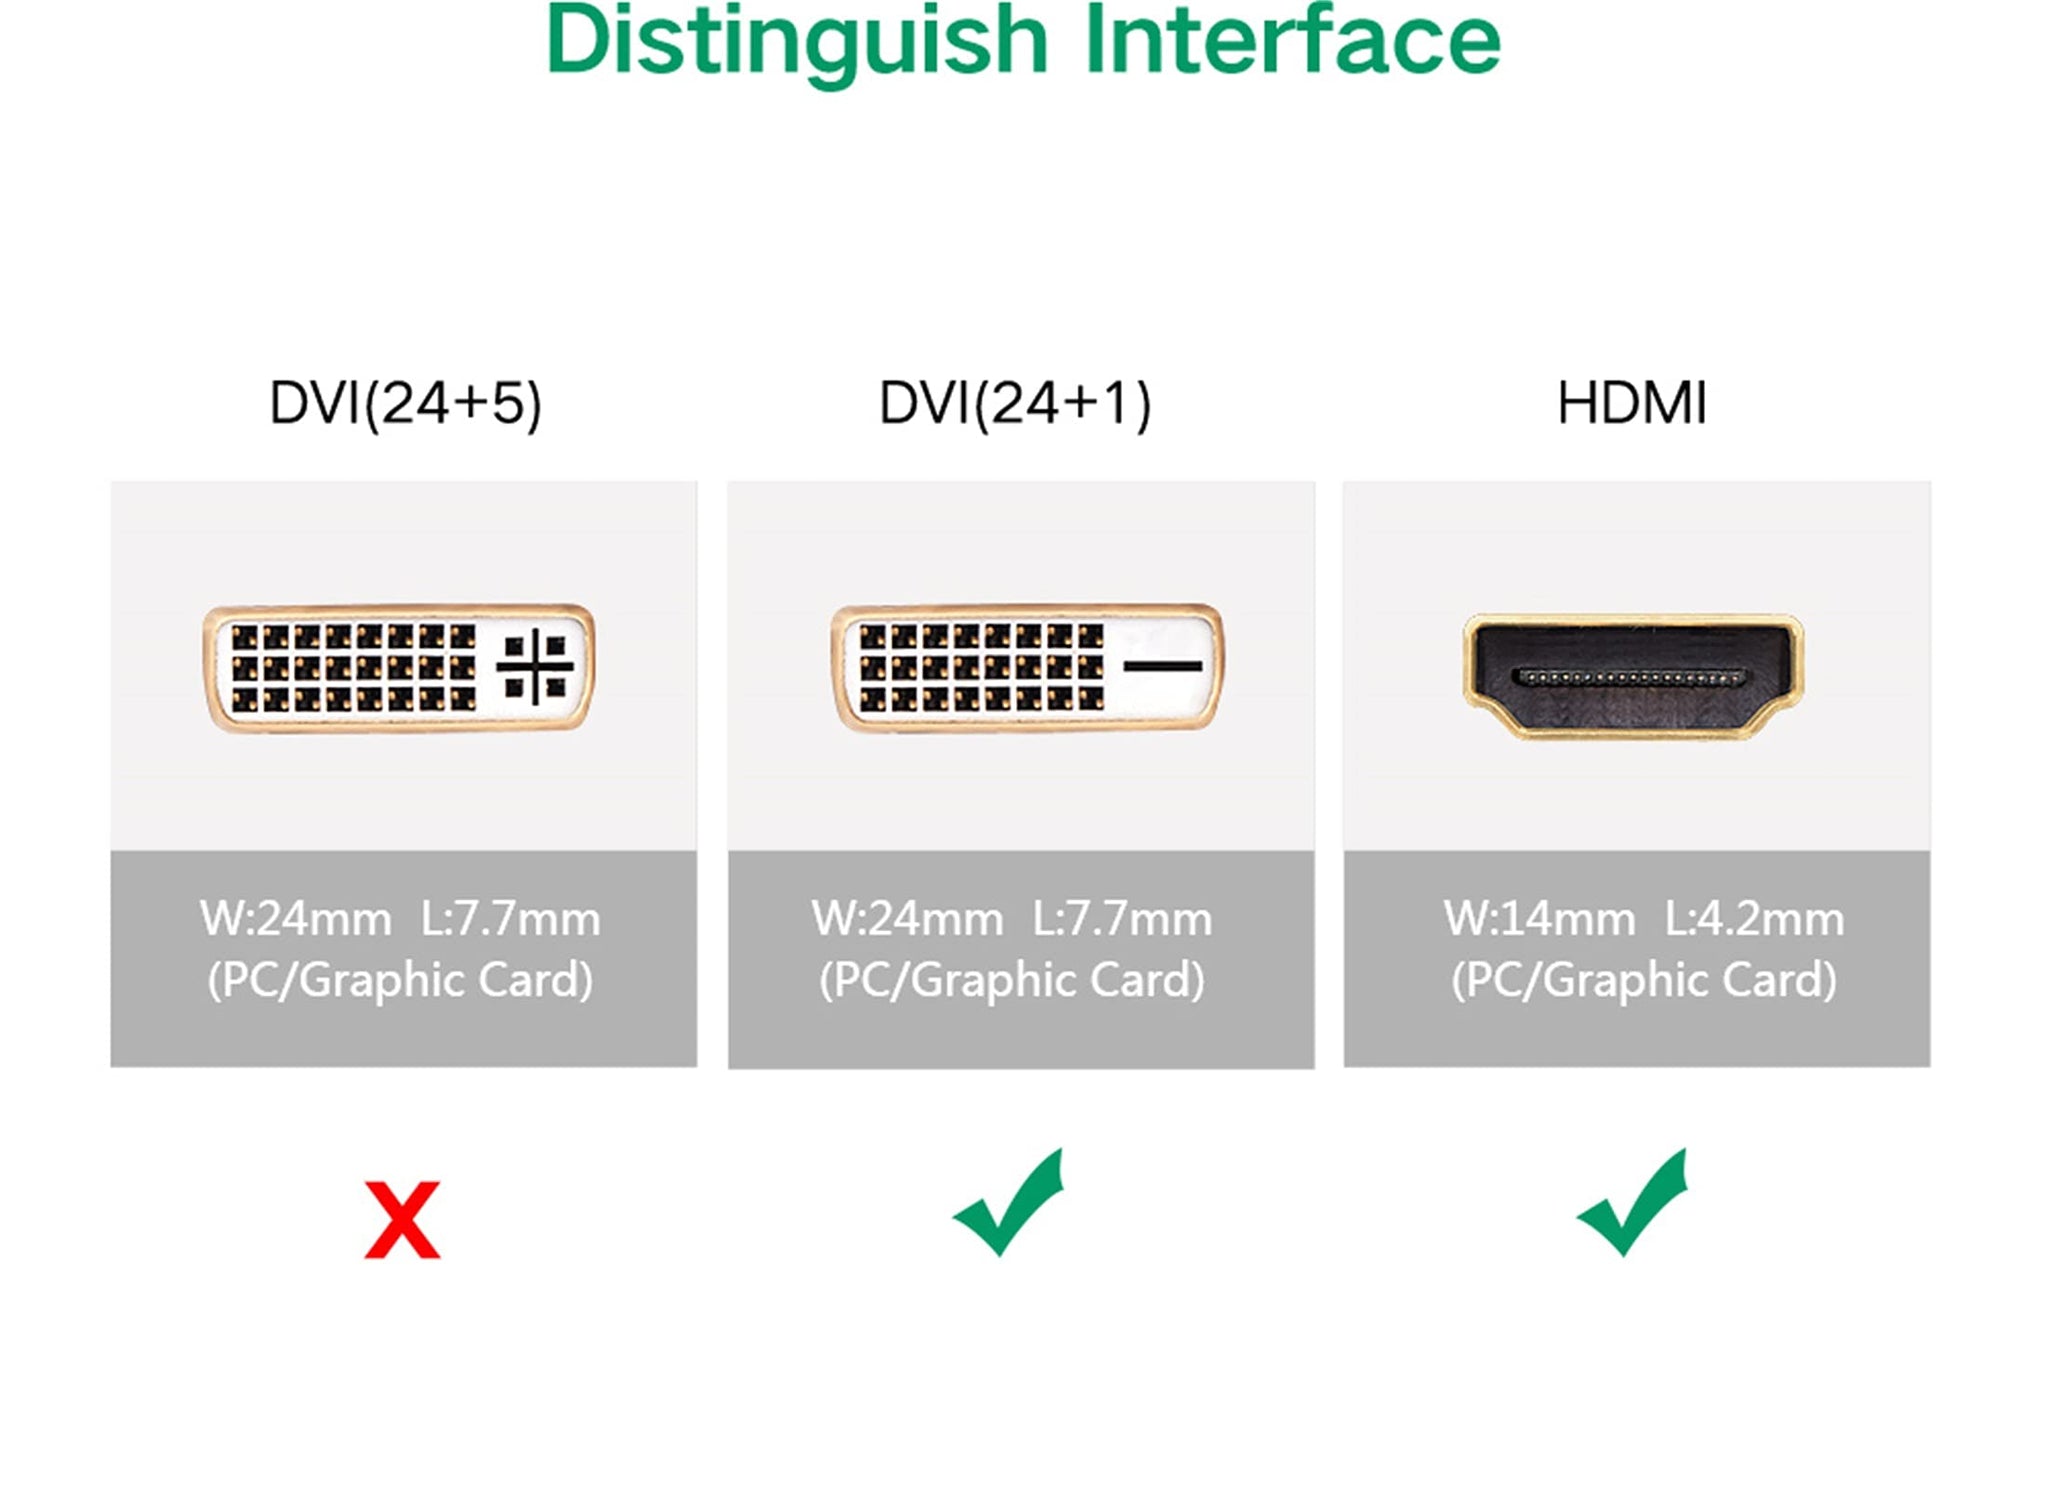 UGREEN Bi-directional HDMI to DVI Adapter DVI-D Male to HDMI Female, HDMI to DVI 24+1 Converter Support 1080P for Computer, PC Host, Laptop, Graphics Card to HDTV, LG HP Dell Monitor, and Projector